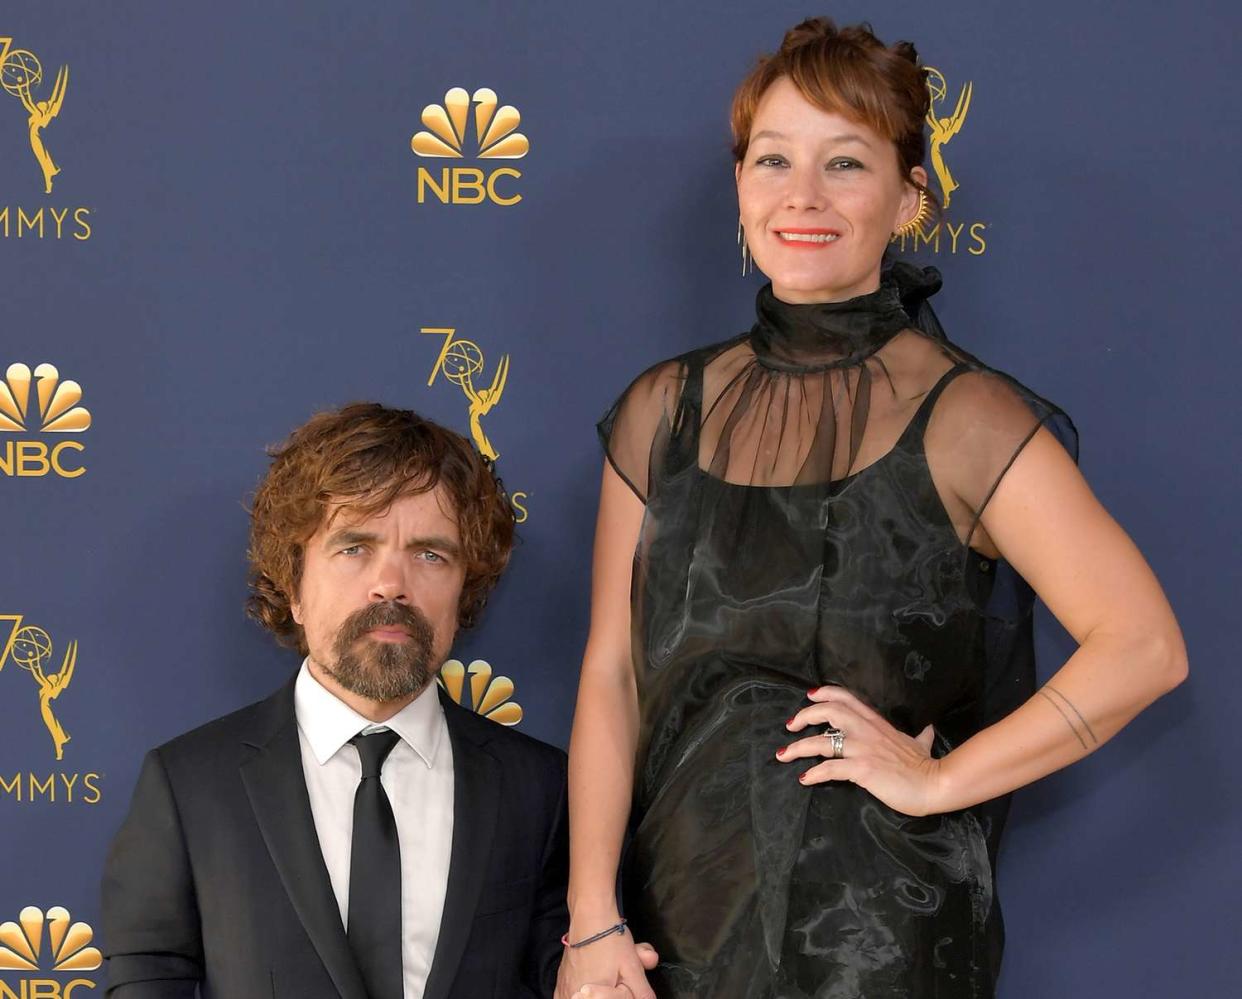 Peter Dinklage (L) and Erica Schmidt attend the 70th Emmy Awards at Microsoft Theater on September 17, 2018 in Los Angeles, California